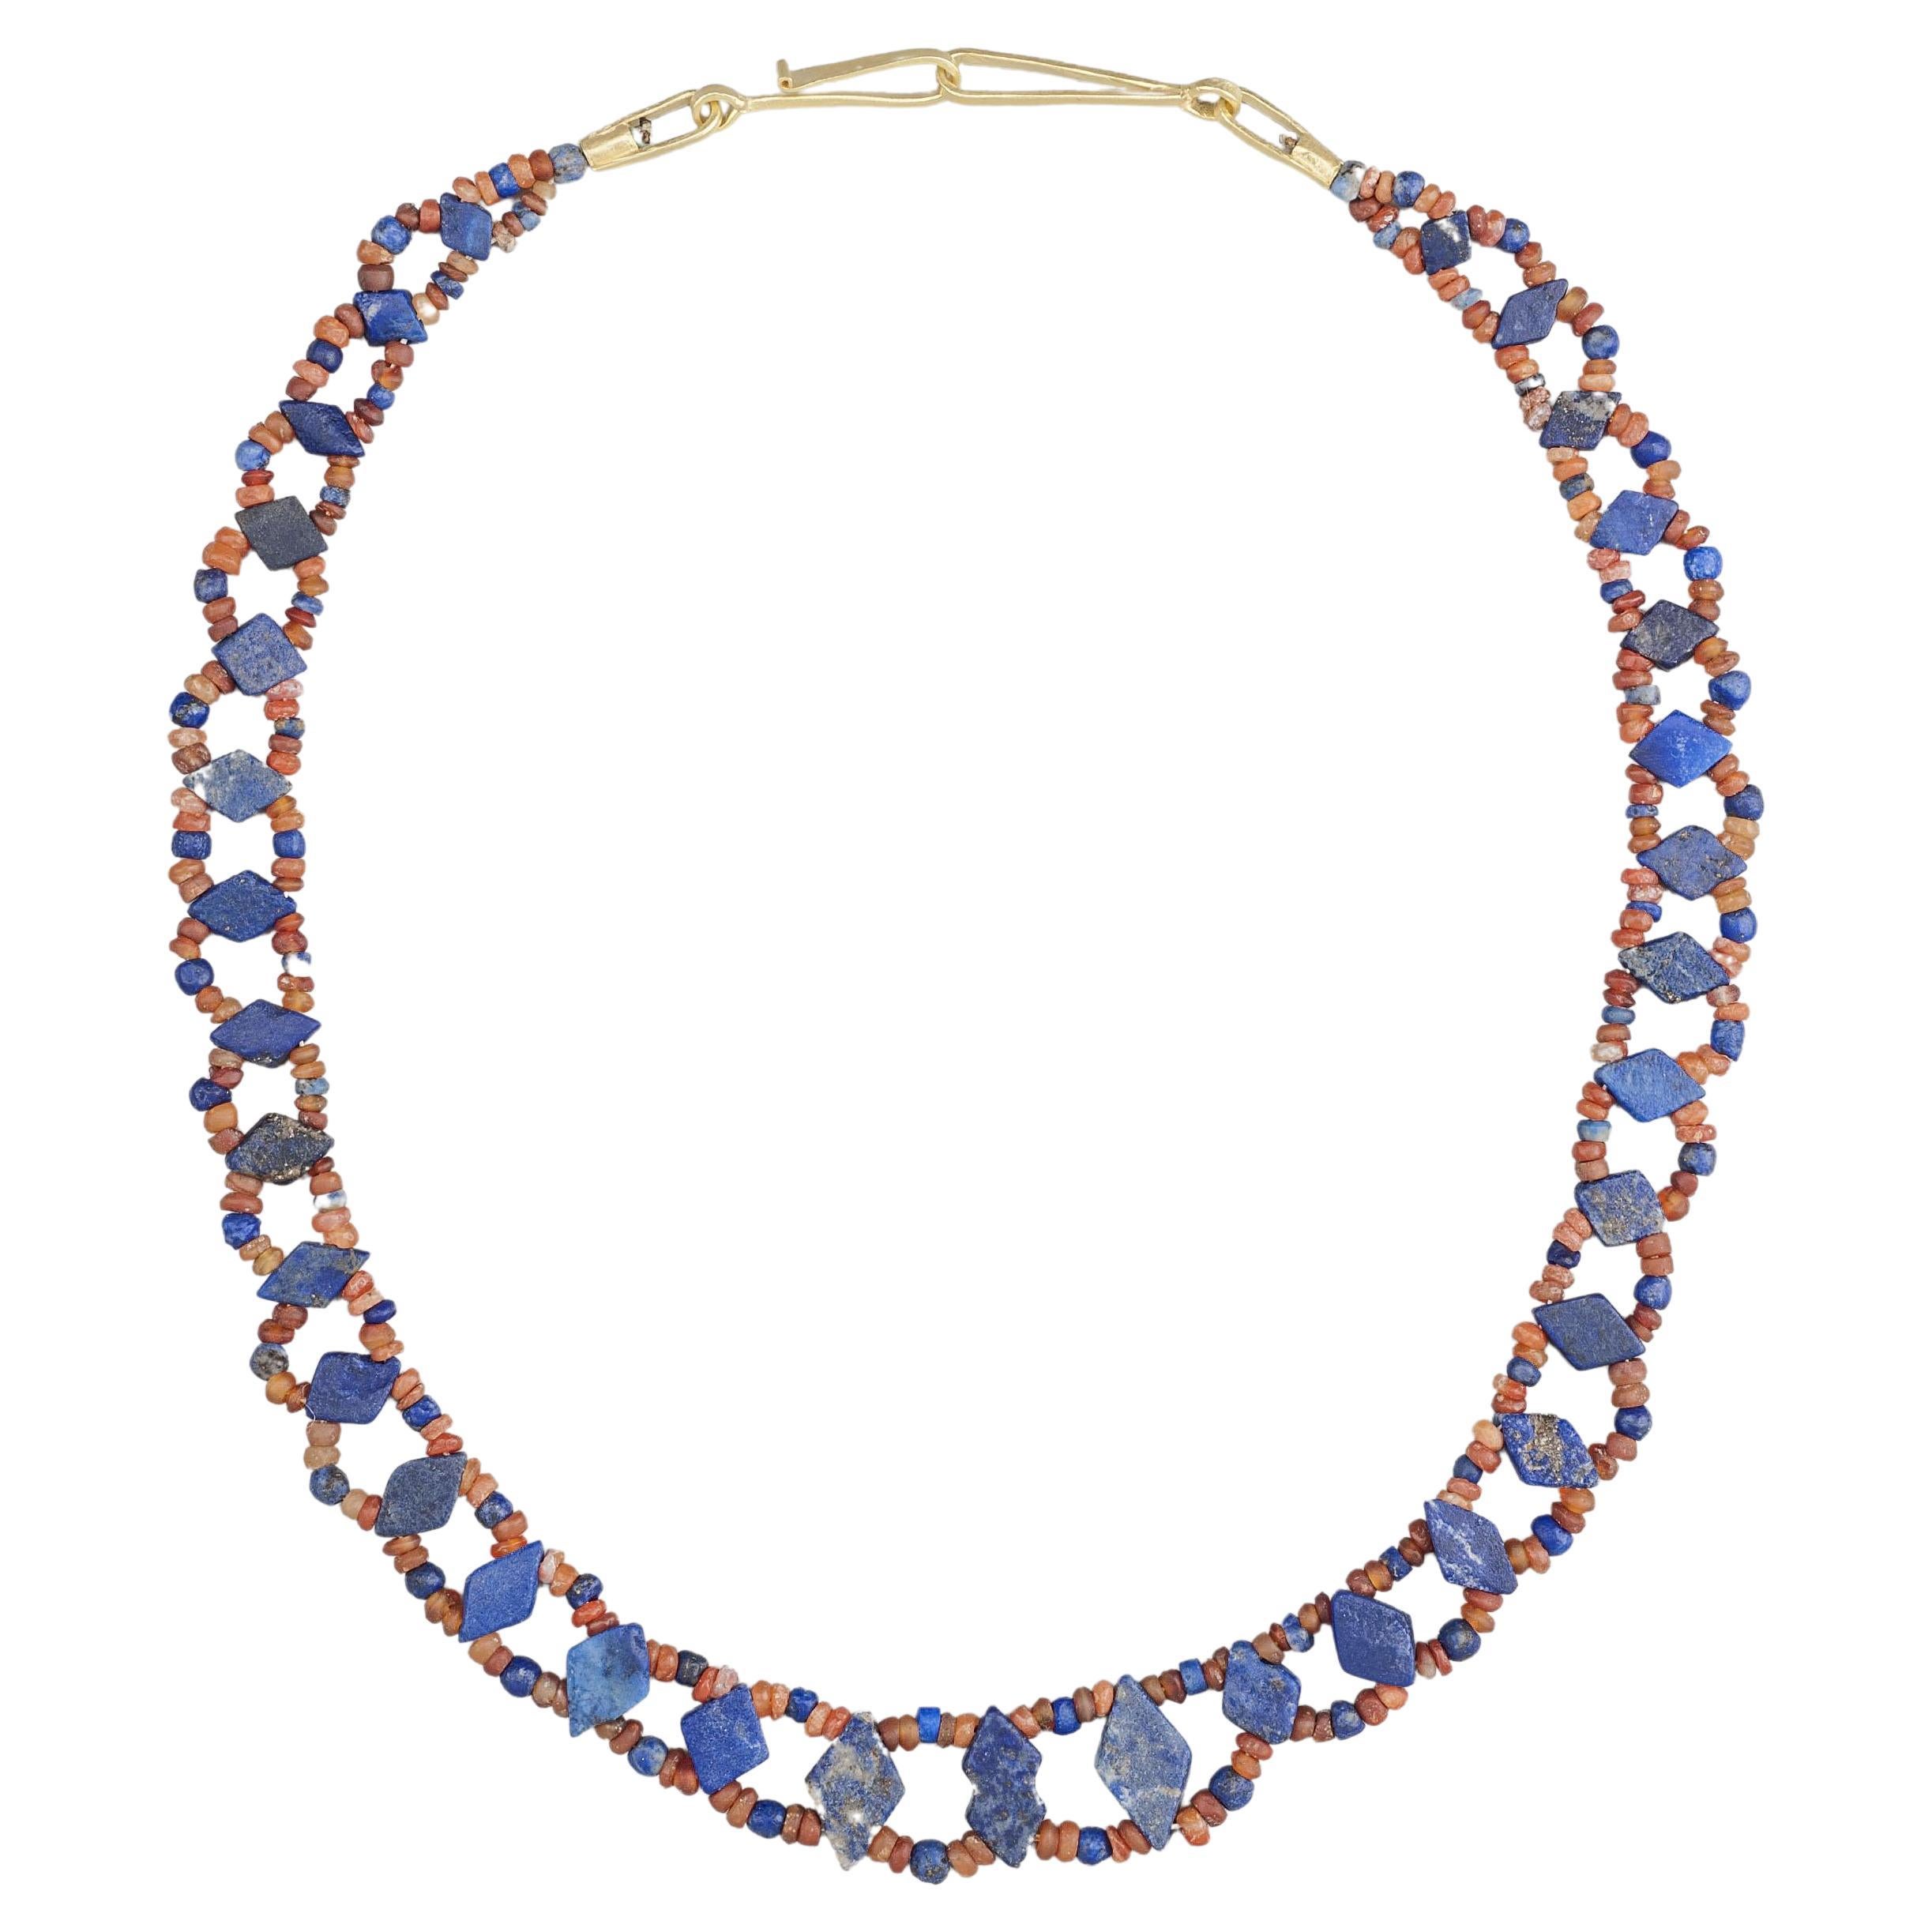 Ancient Double Stranded Choker of Lapis Lazuli, Carnelian, with 20k Gold Clasp